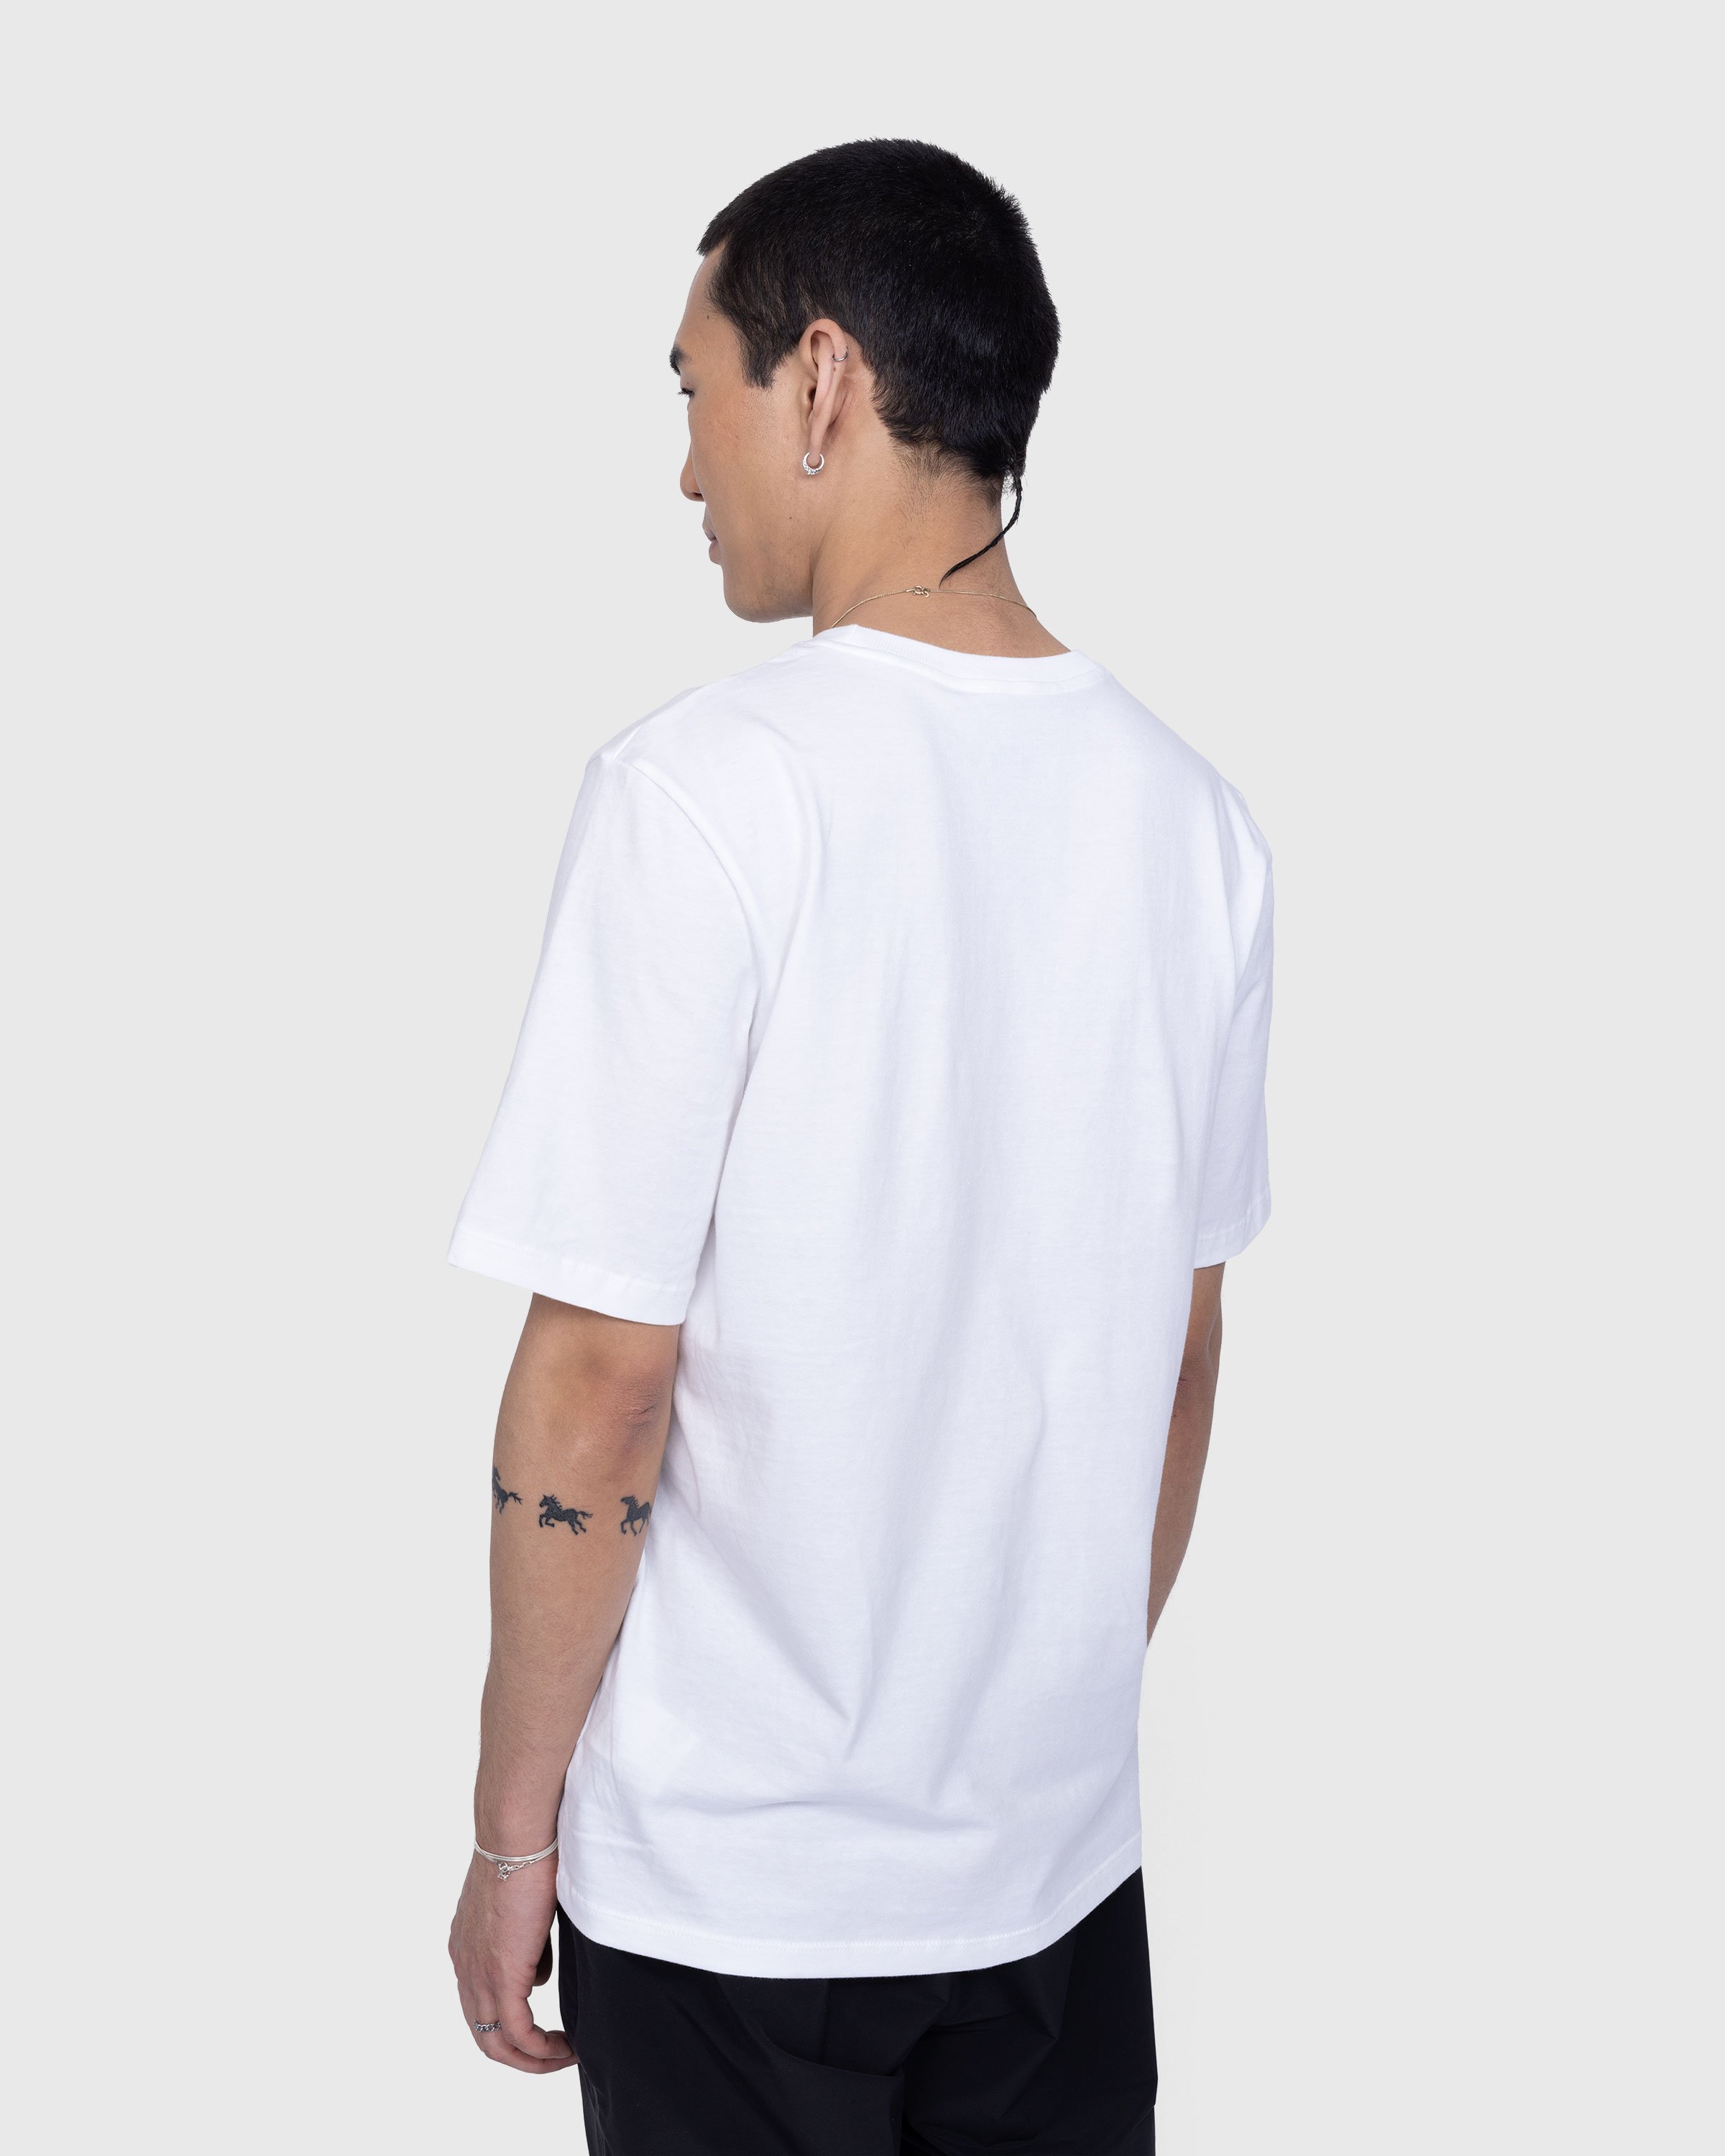 The North Face - Coordinates T-Shirt TNF White/TNF Black - Clothing - White - Image 3